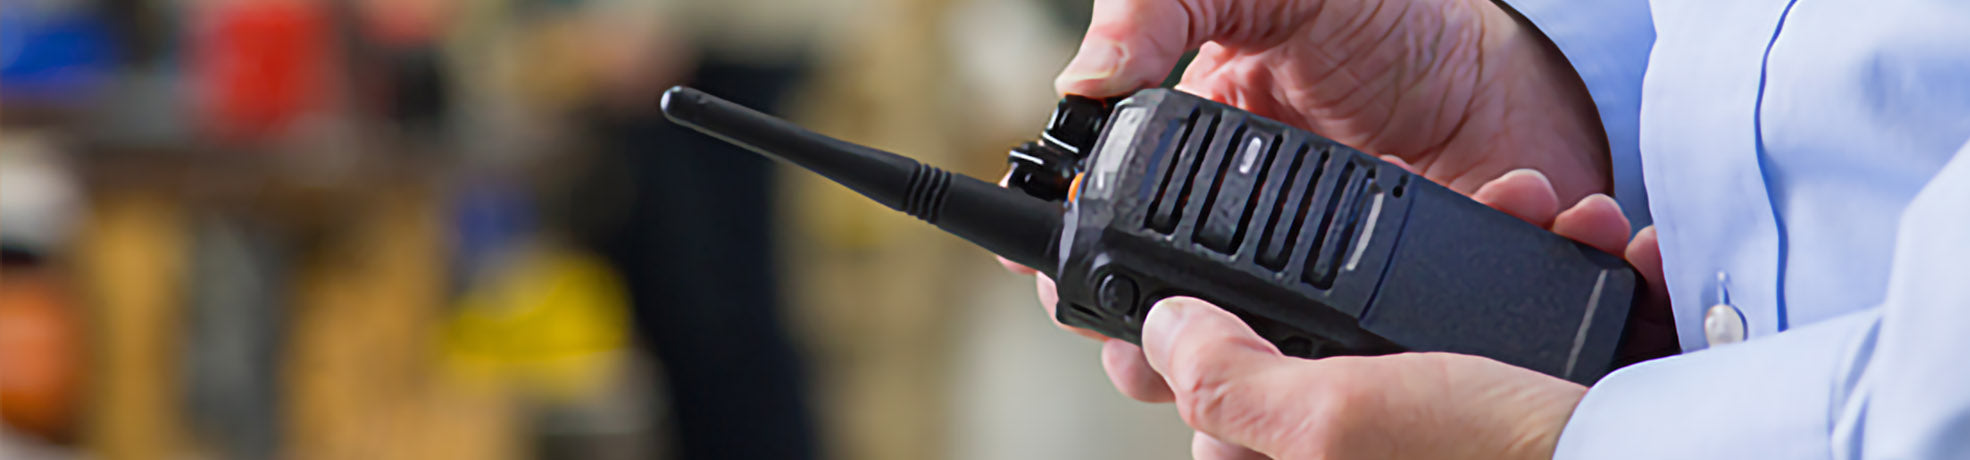 Radio and Communication Devices | All Security Equipment